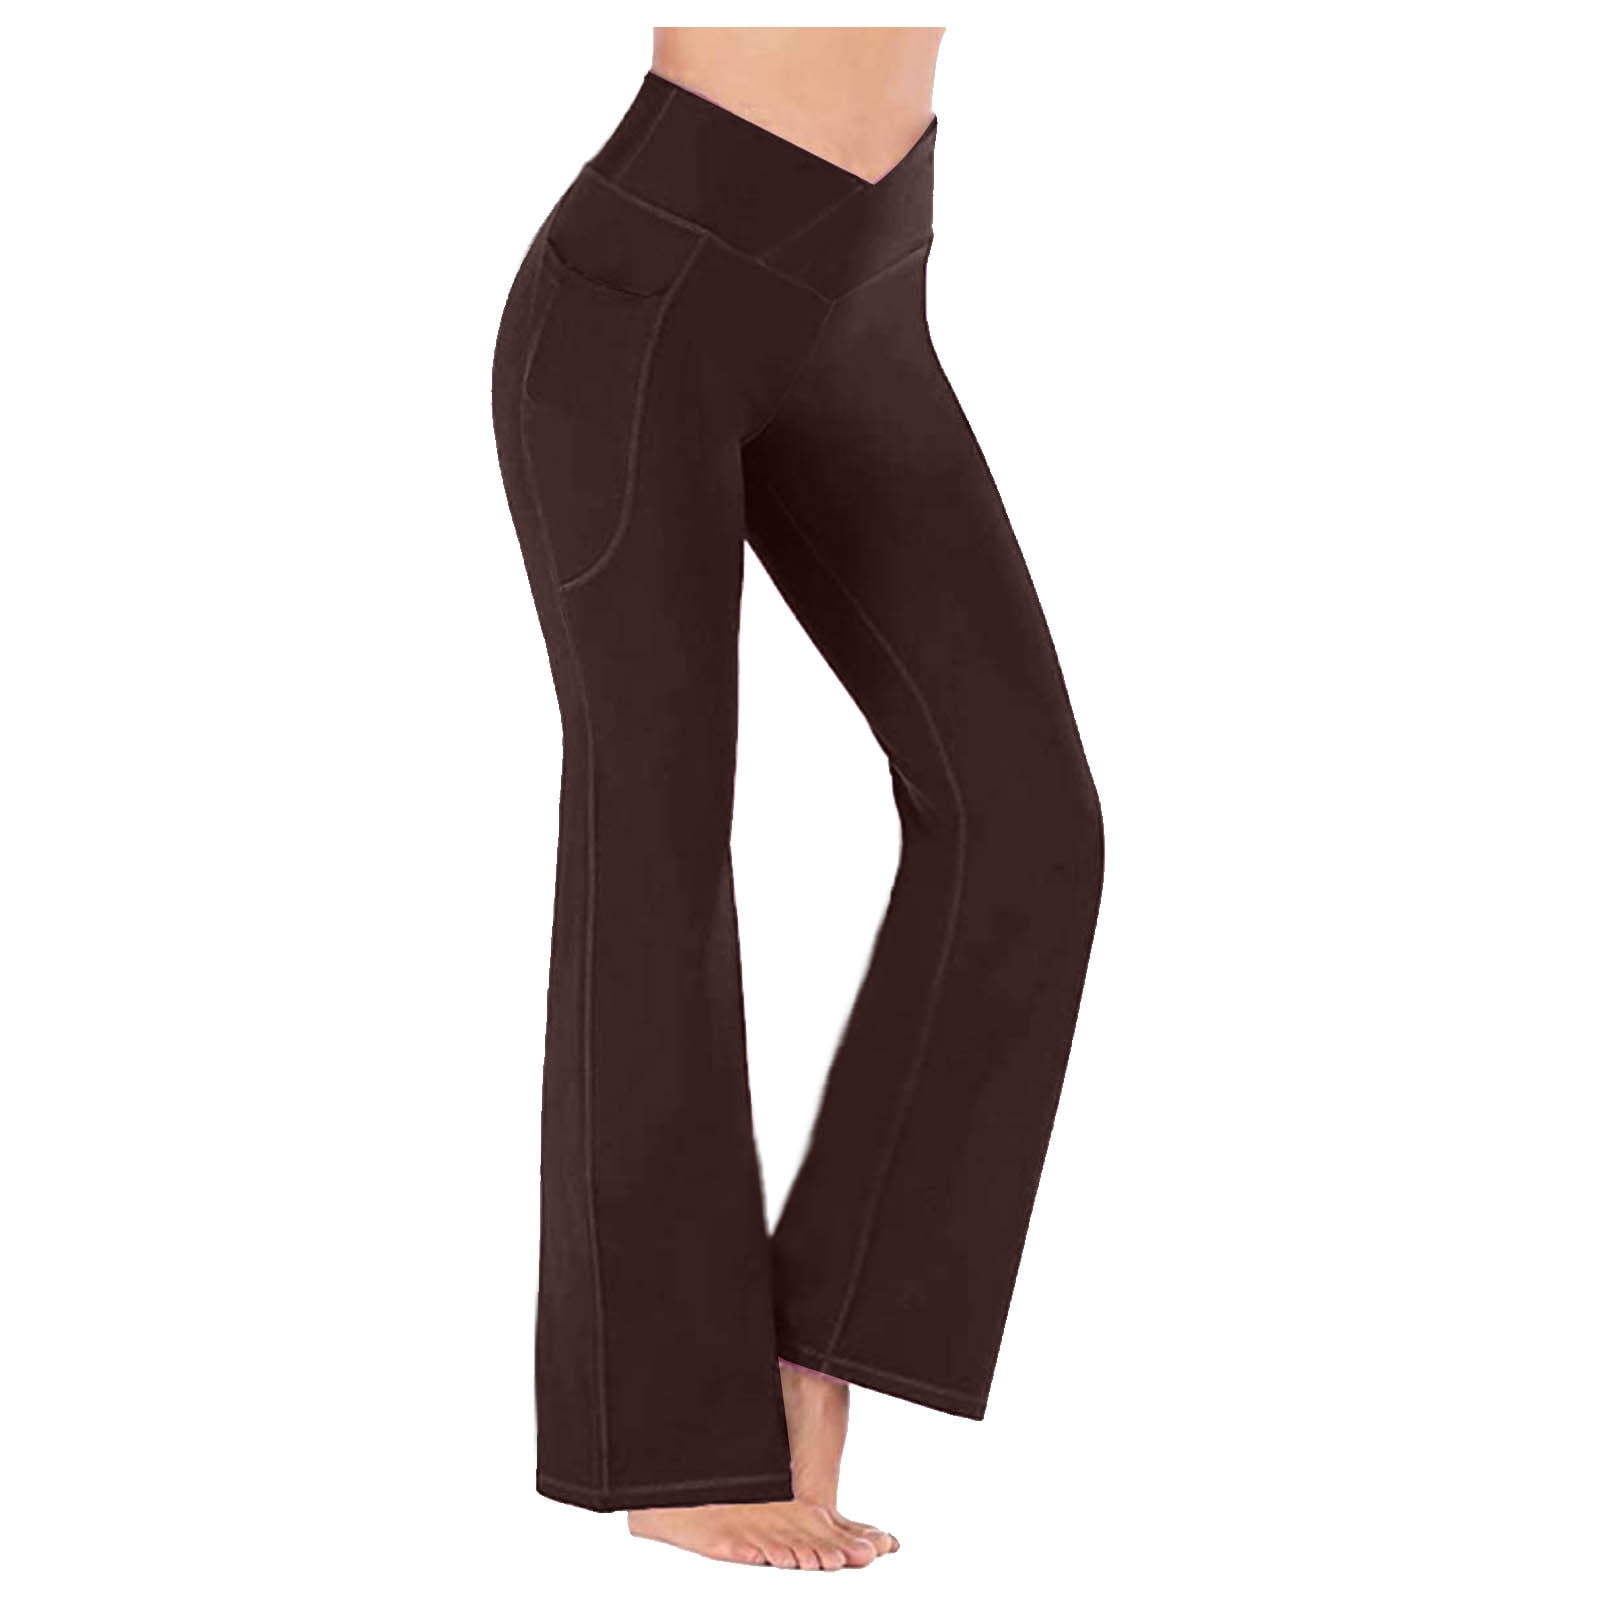 Owordtank Flare Yoga Pants for Women Clearance under $10 with